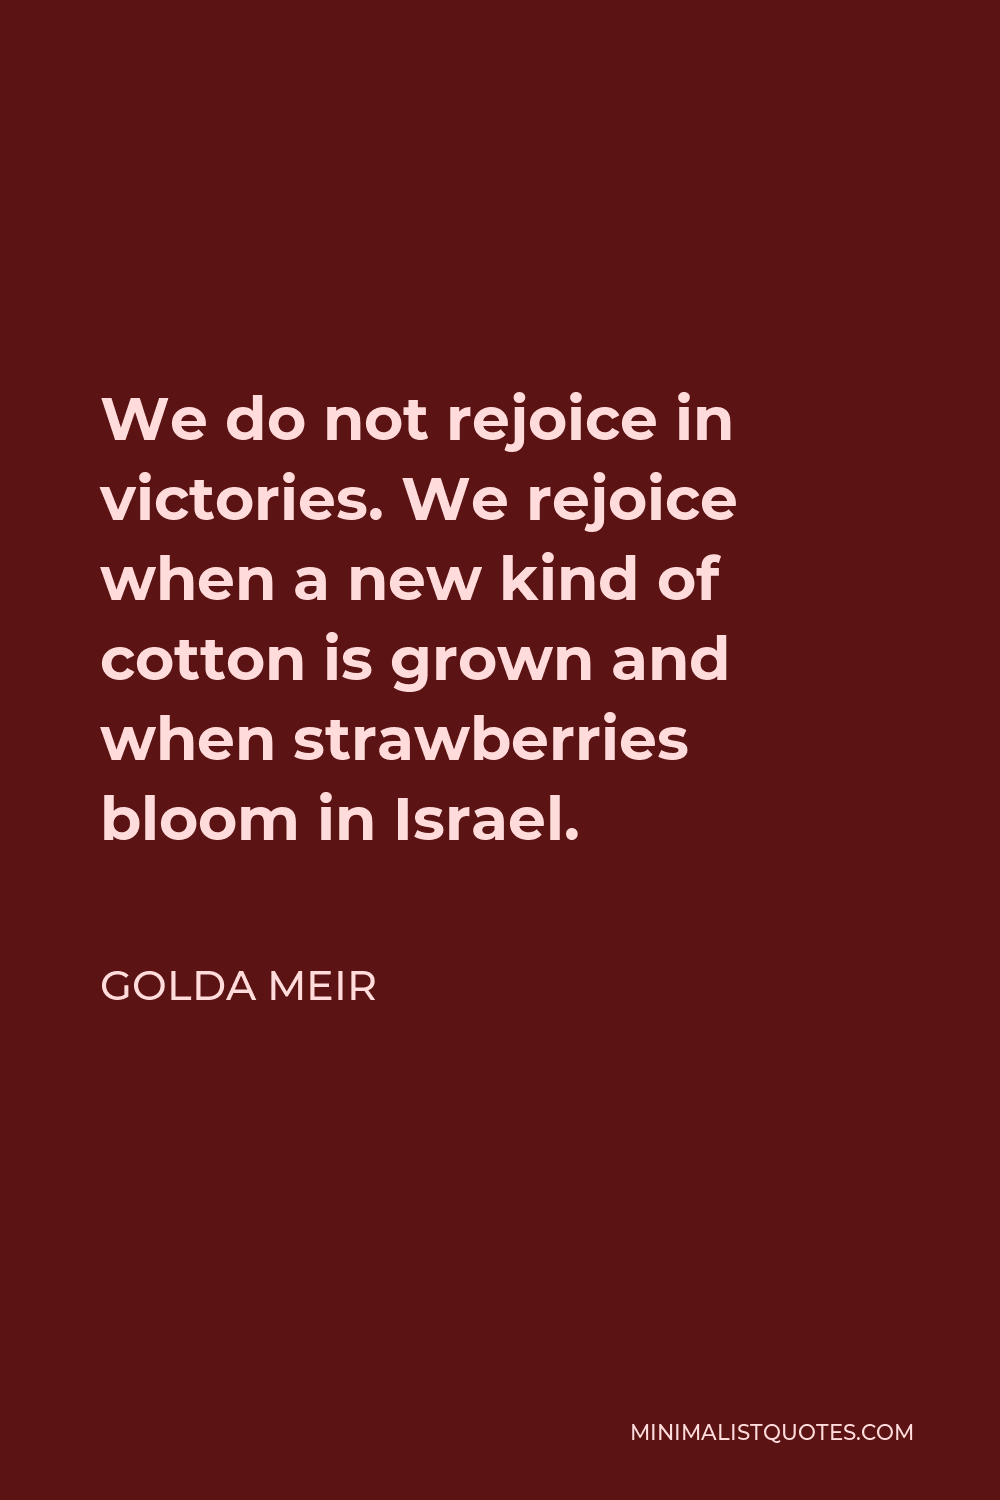 Golda Meir Quote - We do not rejoice in victories. We rejoice when a new kind of cotton is grown and when strawberries bloom in Israel.